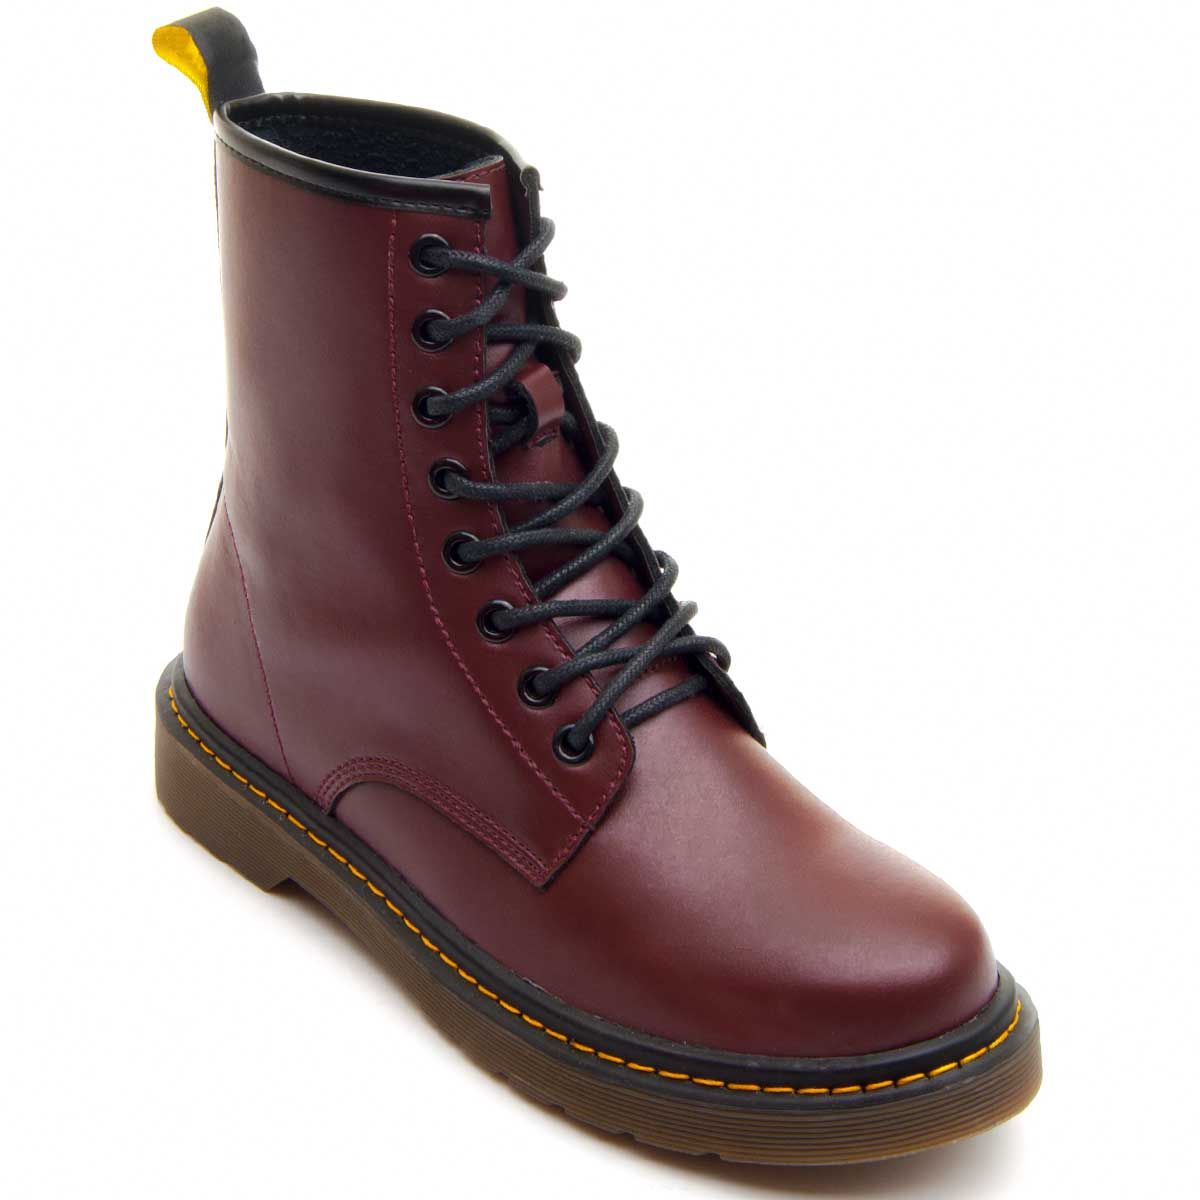 Are you one of those who like the original essence? Well with the strange martinace. Both in its Bordeaux and Black version is ideal thanks to follow the original line of material tones and seams of yellow thread and brown caramel floor. No doubt you will achieve a very radical and personal style with a boot like this. Easy to clean the floor is non-slip. Comfortable Hormo. Previous and posterior buttresses with rear pull to facilitate stroke. Collection by Azarey.